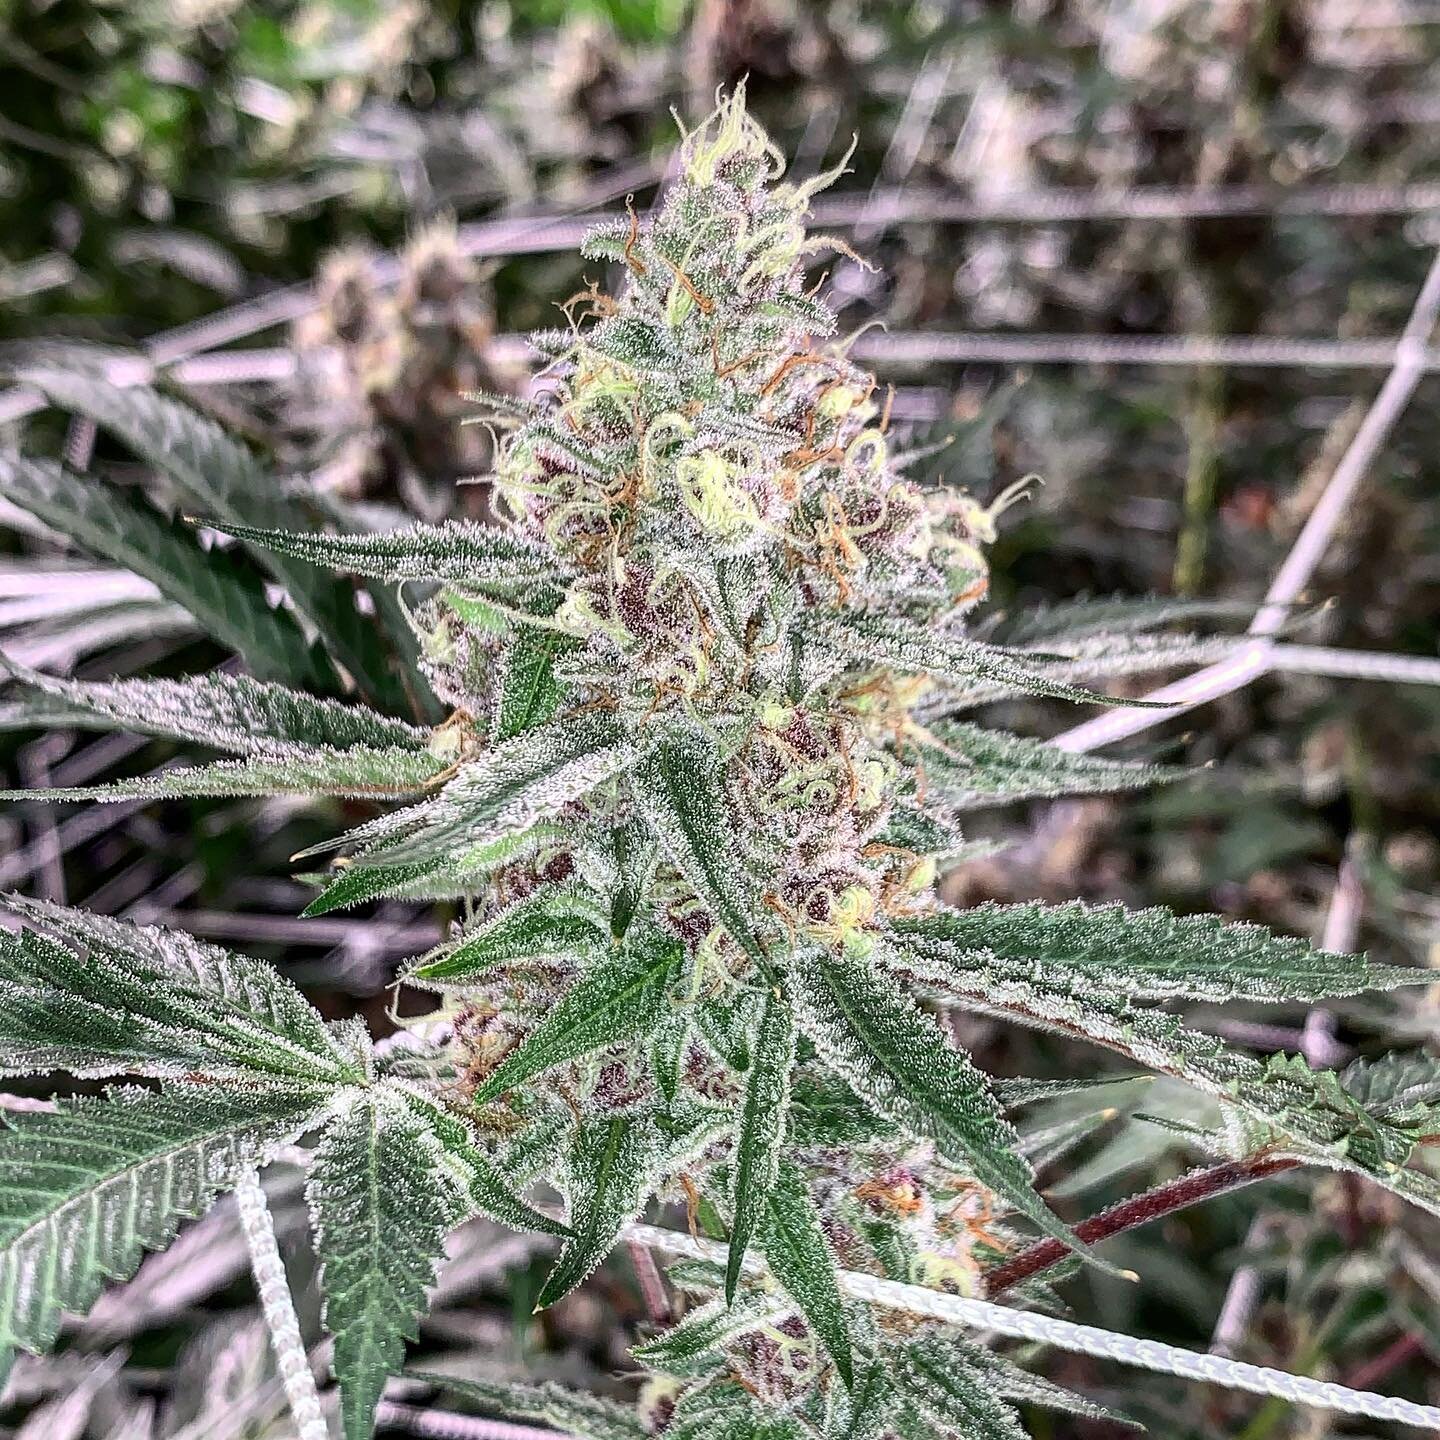 Happy 420!!! Sorry for not posting lately... been ramping up our new spot and will be harvesting soon!! More stuff to come. 
.
.
#420 #organic #medicine #azmmj #trufflebutter @exoticgenetix_mike